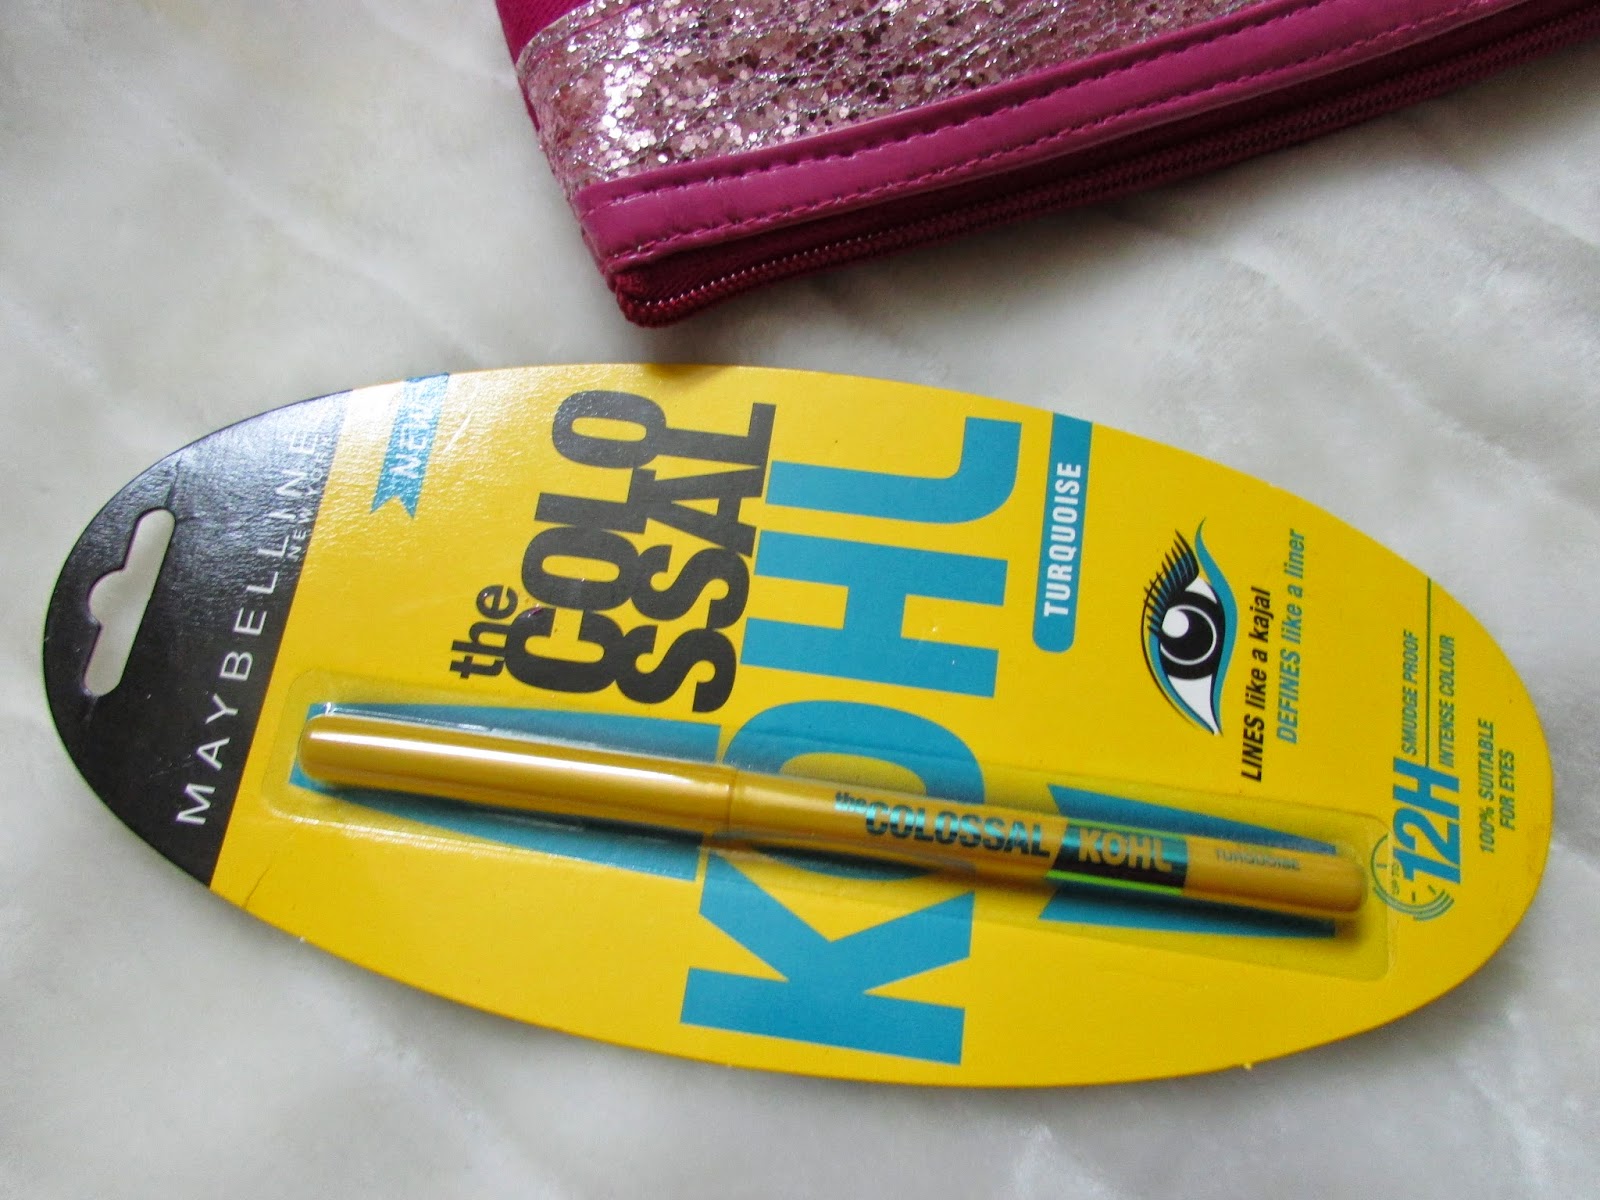 Maybelline Colossal True Turquoise Kohl Review, Maybelline Colossal True Turquoise Kohl  price india, how to wear blue eyeliner, best blue eyeliner, best eyeliner for summers, maybelline colored eyeliner, colored eyeliner india, Maybelline Turquoise kajal, how to wear Turquoise kajal, beauty , fashion,beauty and fashion,beauty blog, fashion blog , indian beauty blog,indian fashion blog, beauty and fashion blog, indian beauty and fashion blog, indian bloggers, indian beauty bloggers, indian fashion bloggers,indian bloggers online, top 10 indian bloggers, top indian bloggers,top 10 fashion bloggers, indian bloggers on blogspot,home remedies, how to